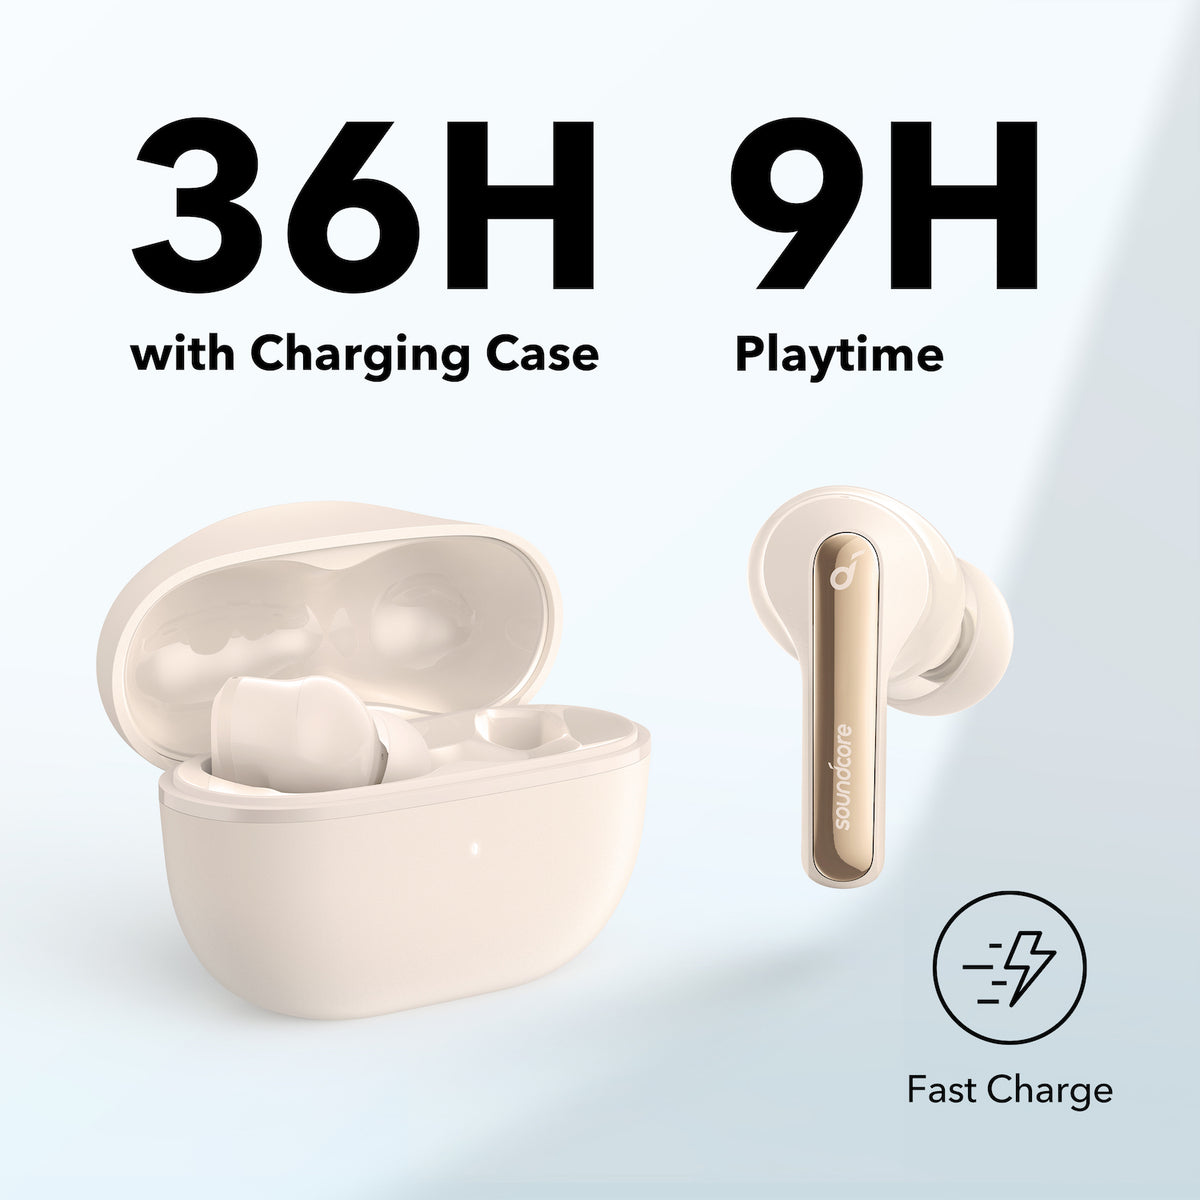 A3993_Noise_Cancelling_Earbuds_TD06_V1_1200x.jpg